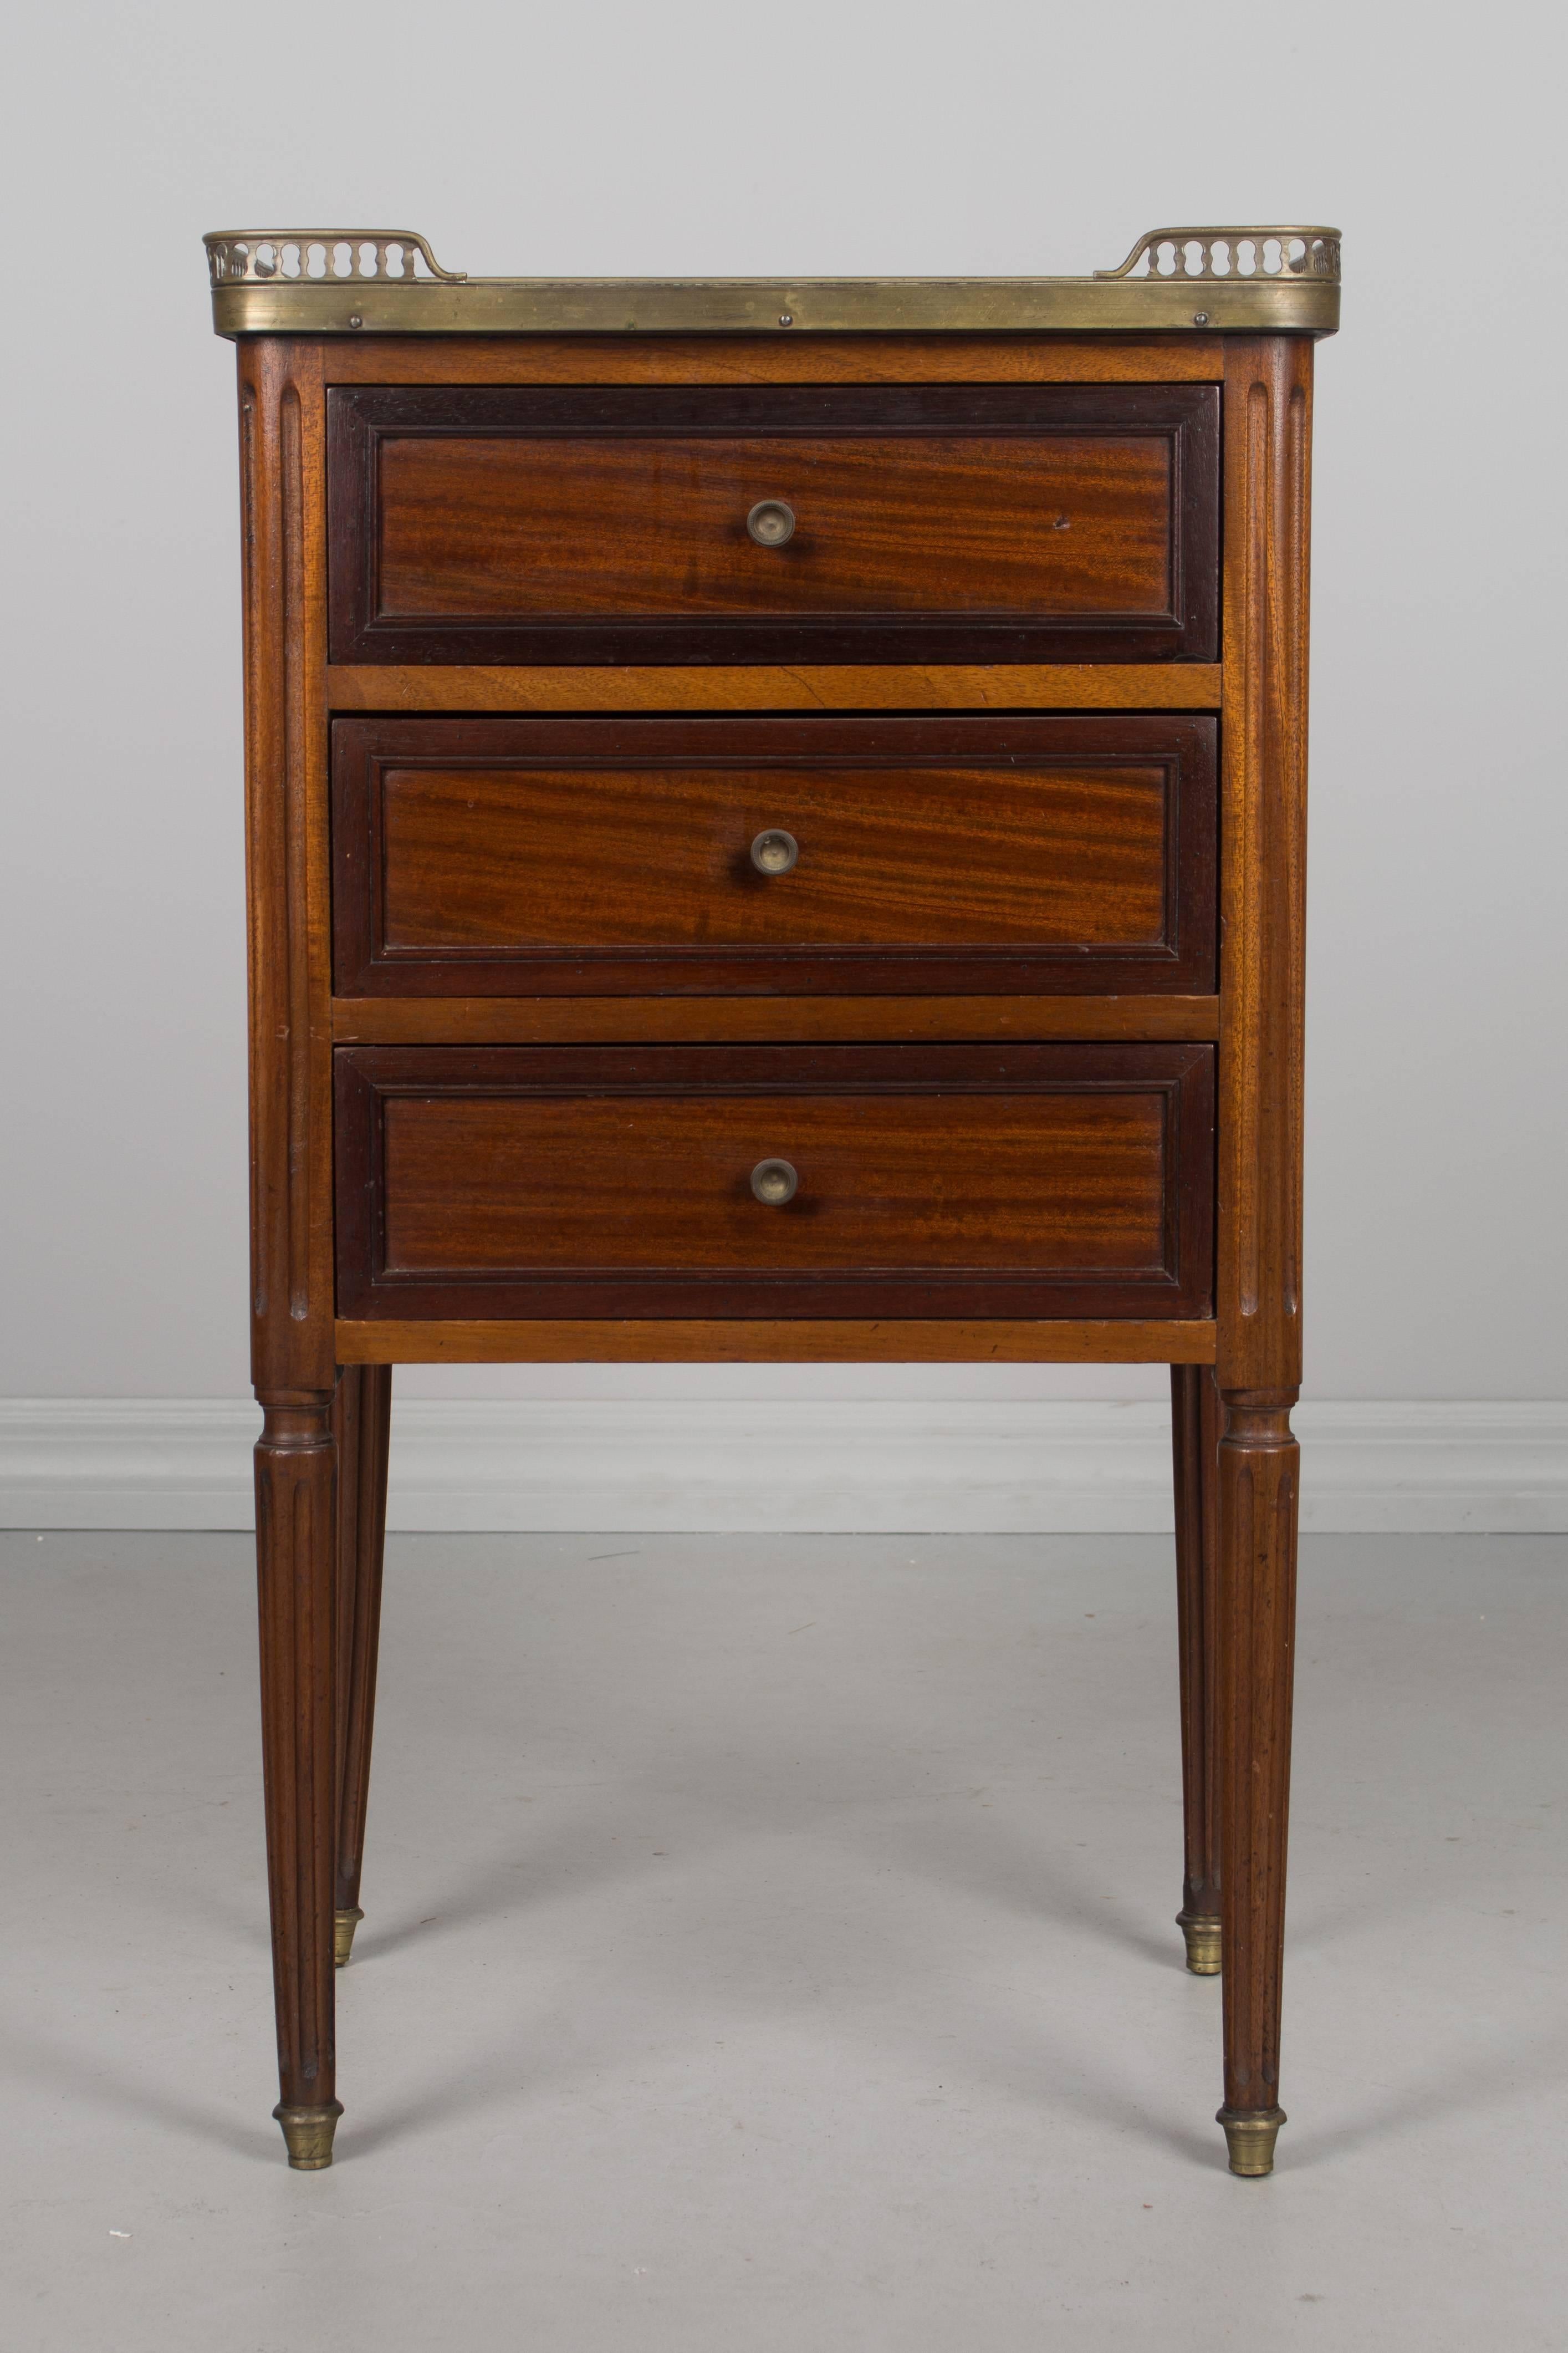 An early 20th century French Louis XVI style side table or nightstand made of solid mahogany with three dovetailed drawers and a white marble top surrounded by a brass gallery. Note the back left leg is a little bent, not broken. More photos